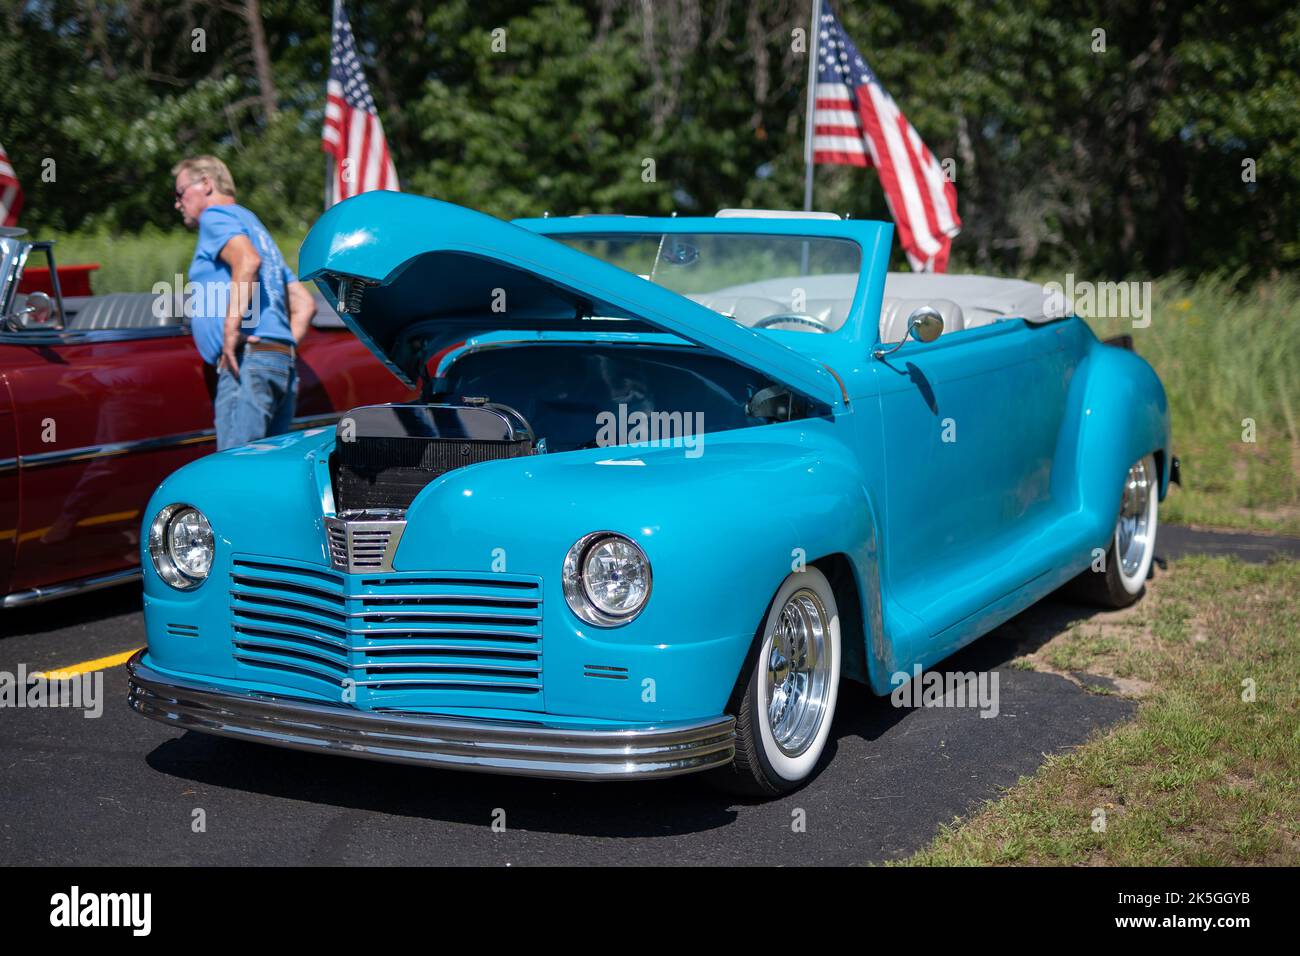 NISSWA, MN â€“ 30 JUL 2022: Vivid sky blue antique vintage convertible automobile with the top down and an open hood, at a car show in Minnesota in bright sunlight. Stock Photo